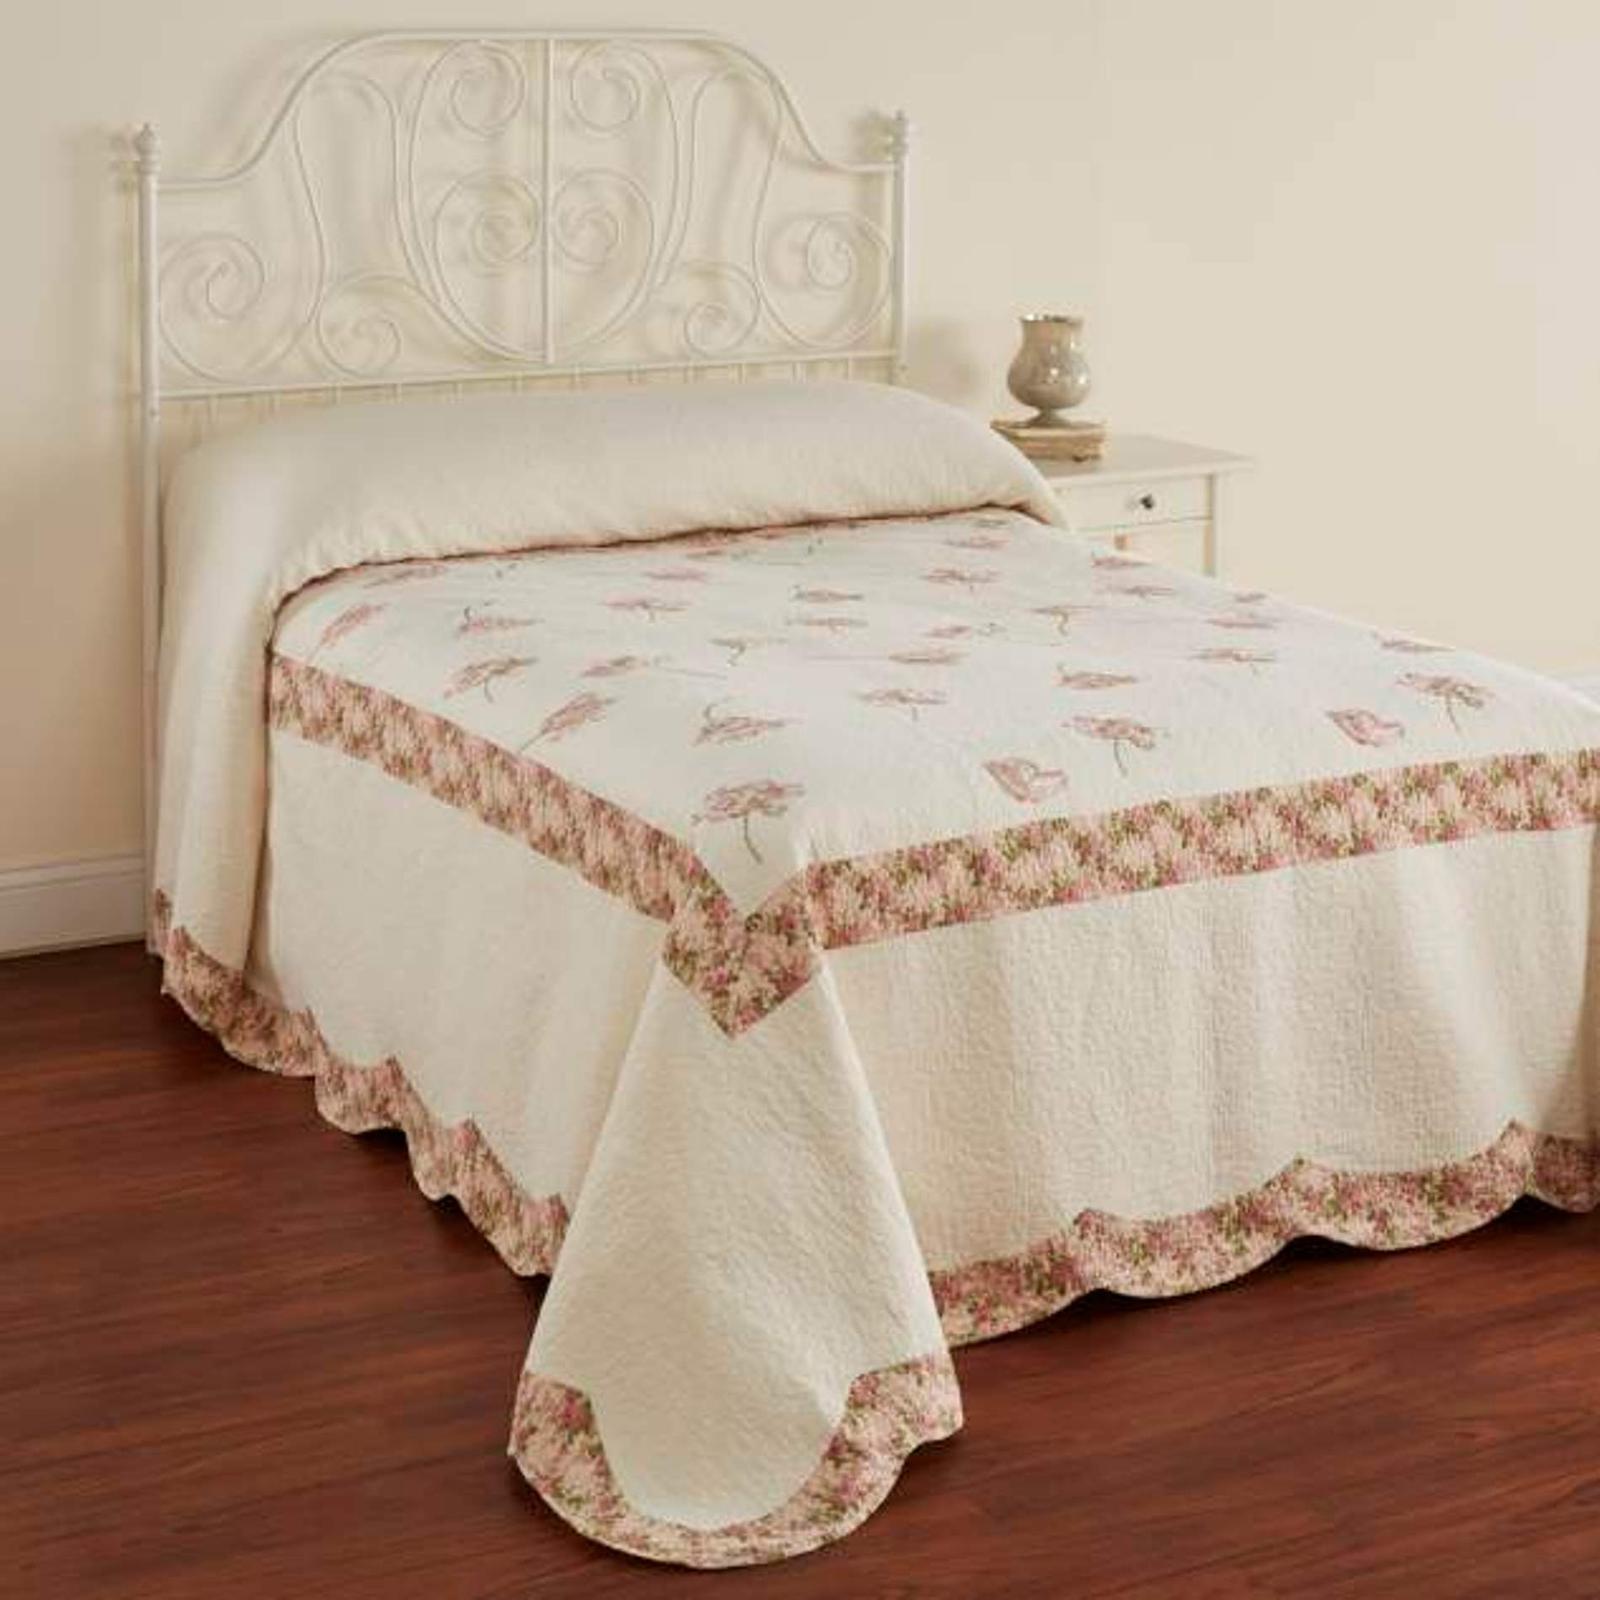 Cannon Embroidered Bedspread - Floral